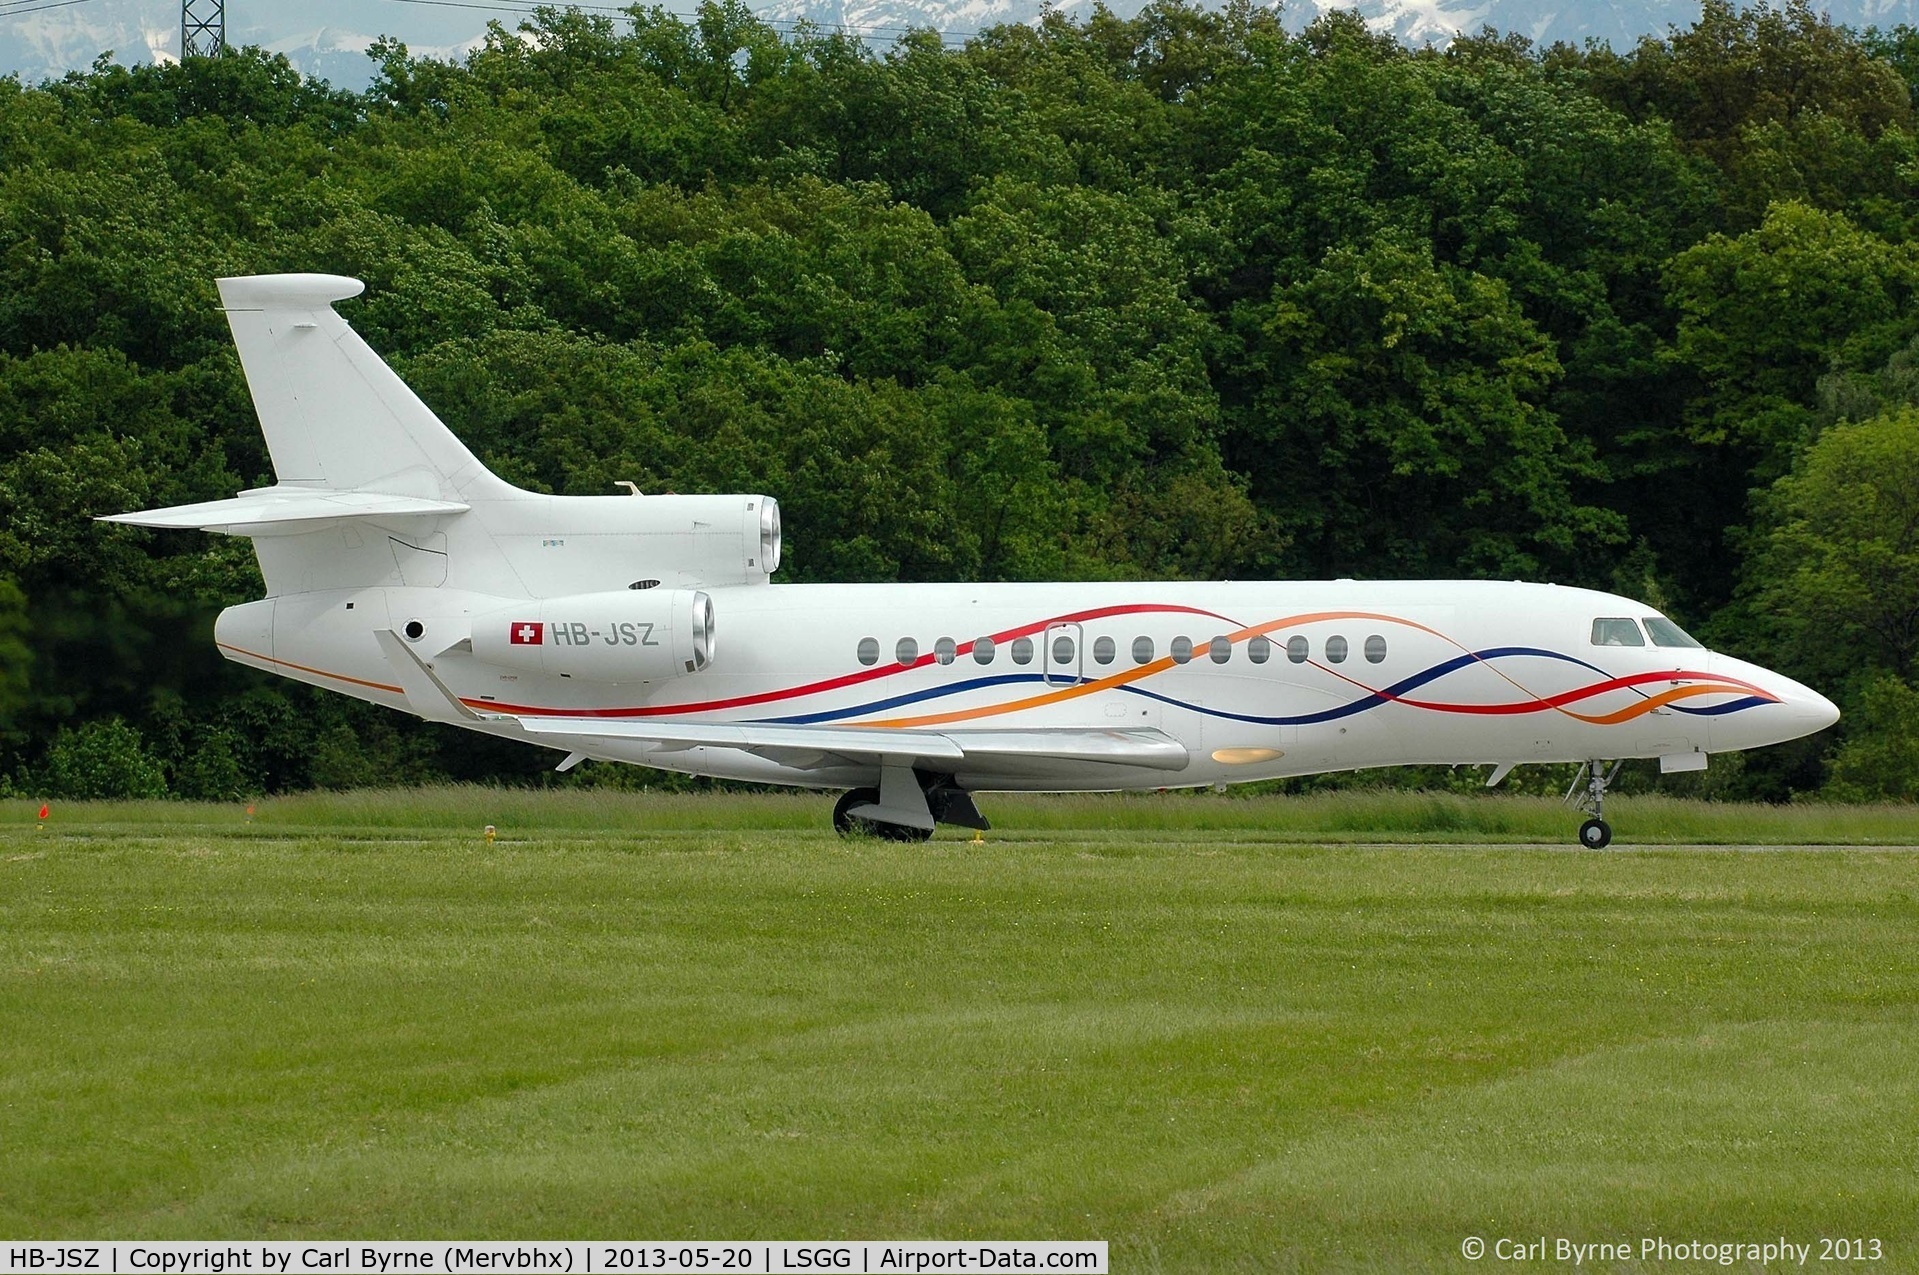 HB-JSZ, 2007 Dassault Falcon 7X C/N 004, Taken from the park at the 05 threshold.